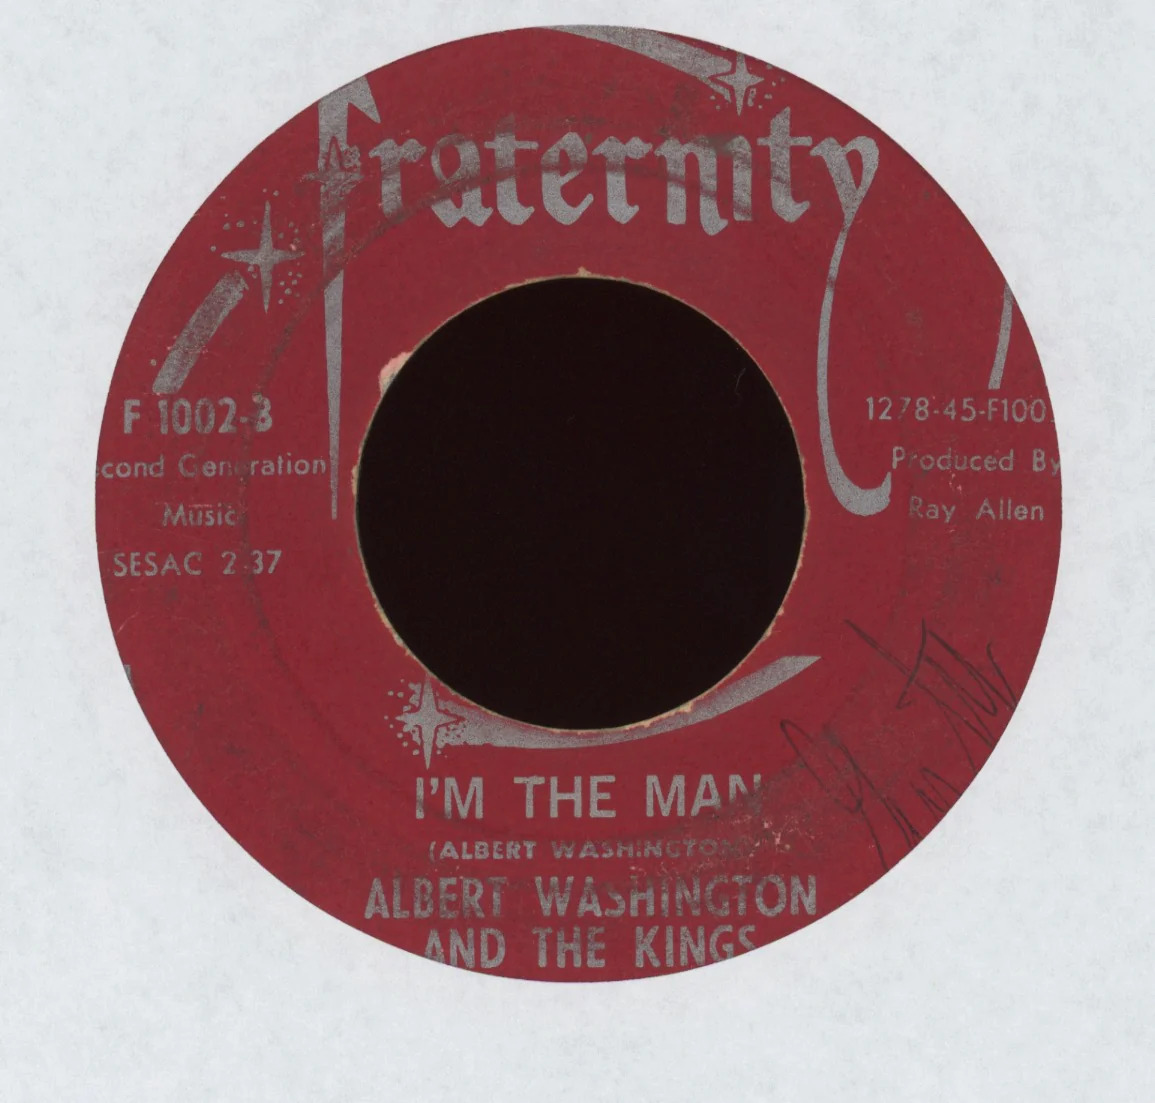 Northern Soul 45 - Albert Washington And The Kings - I'm The Man on Fraternity